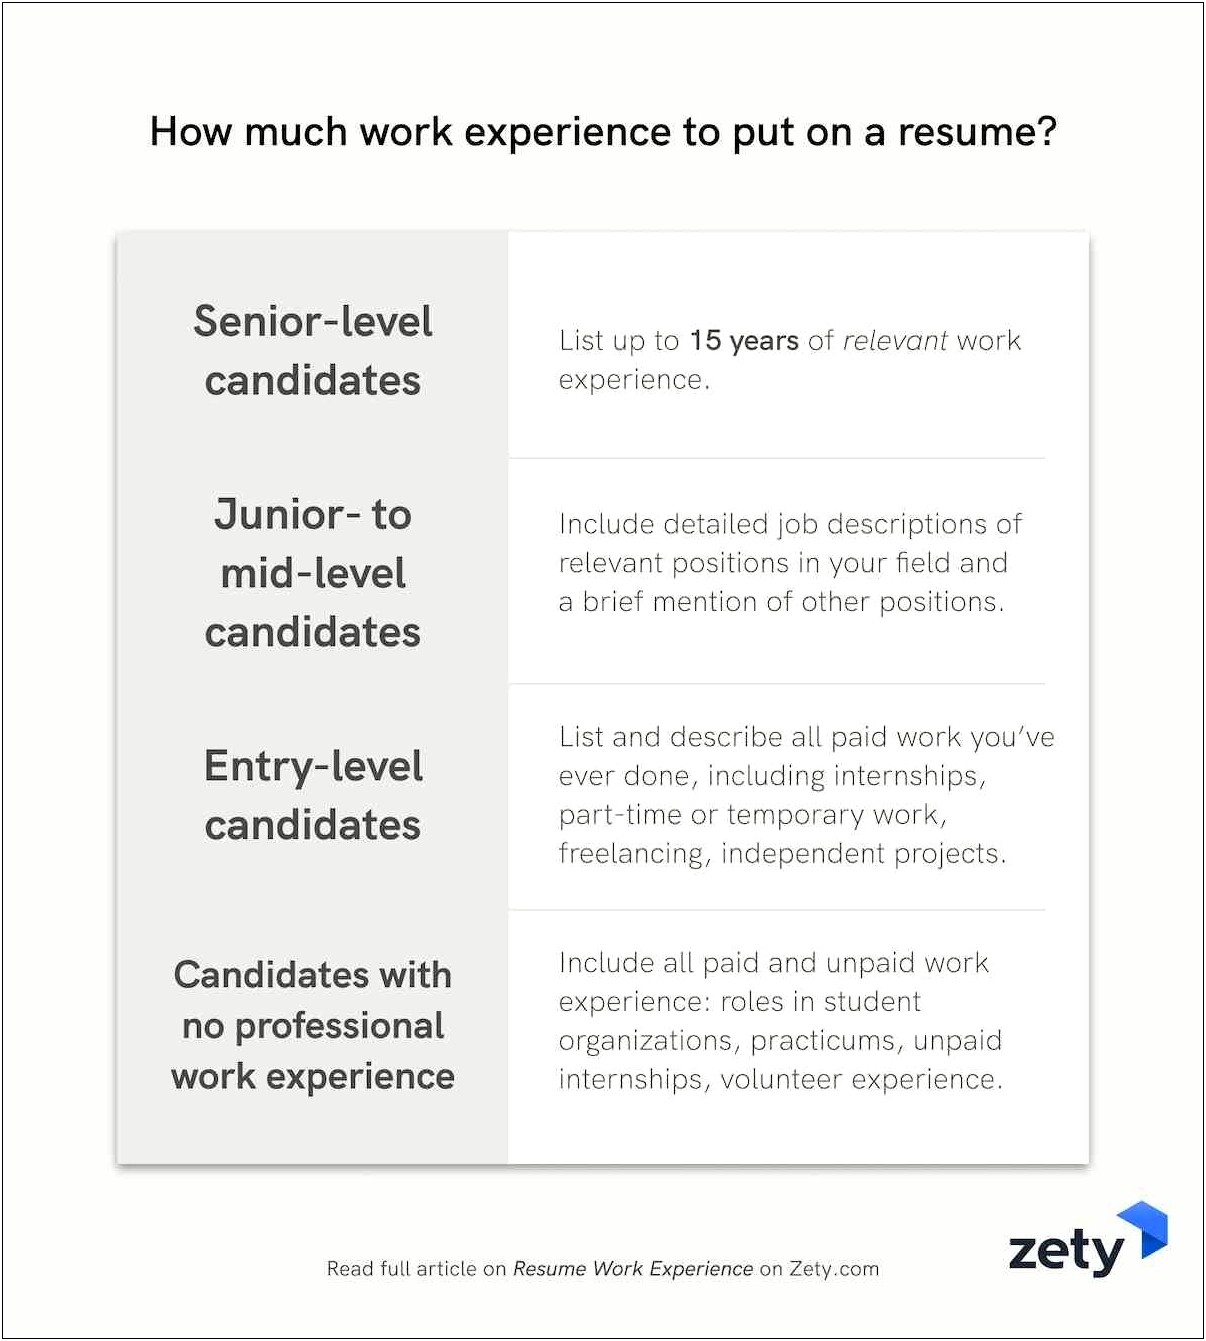 Putting Experience Vs Work Experience On A Resume